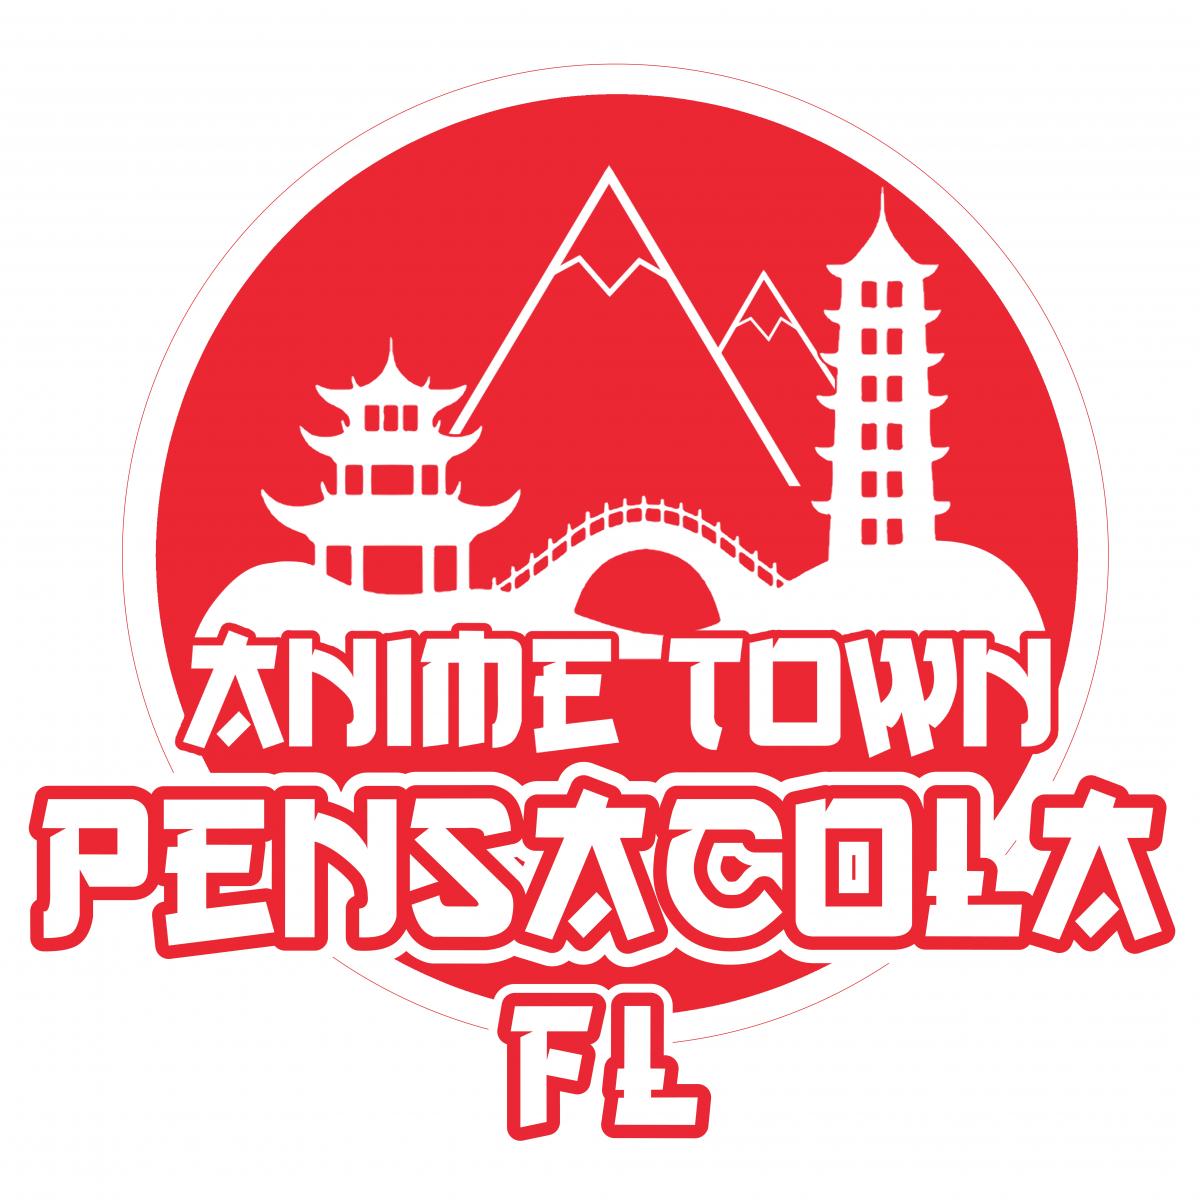 Gonzales turned into an anime town for convention | Ascension |  theadvocate.com